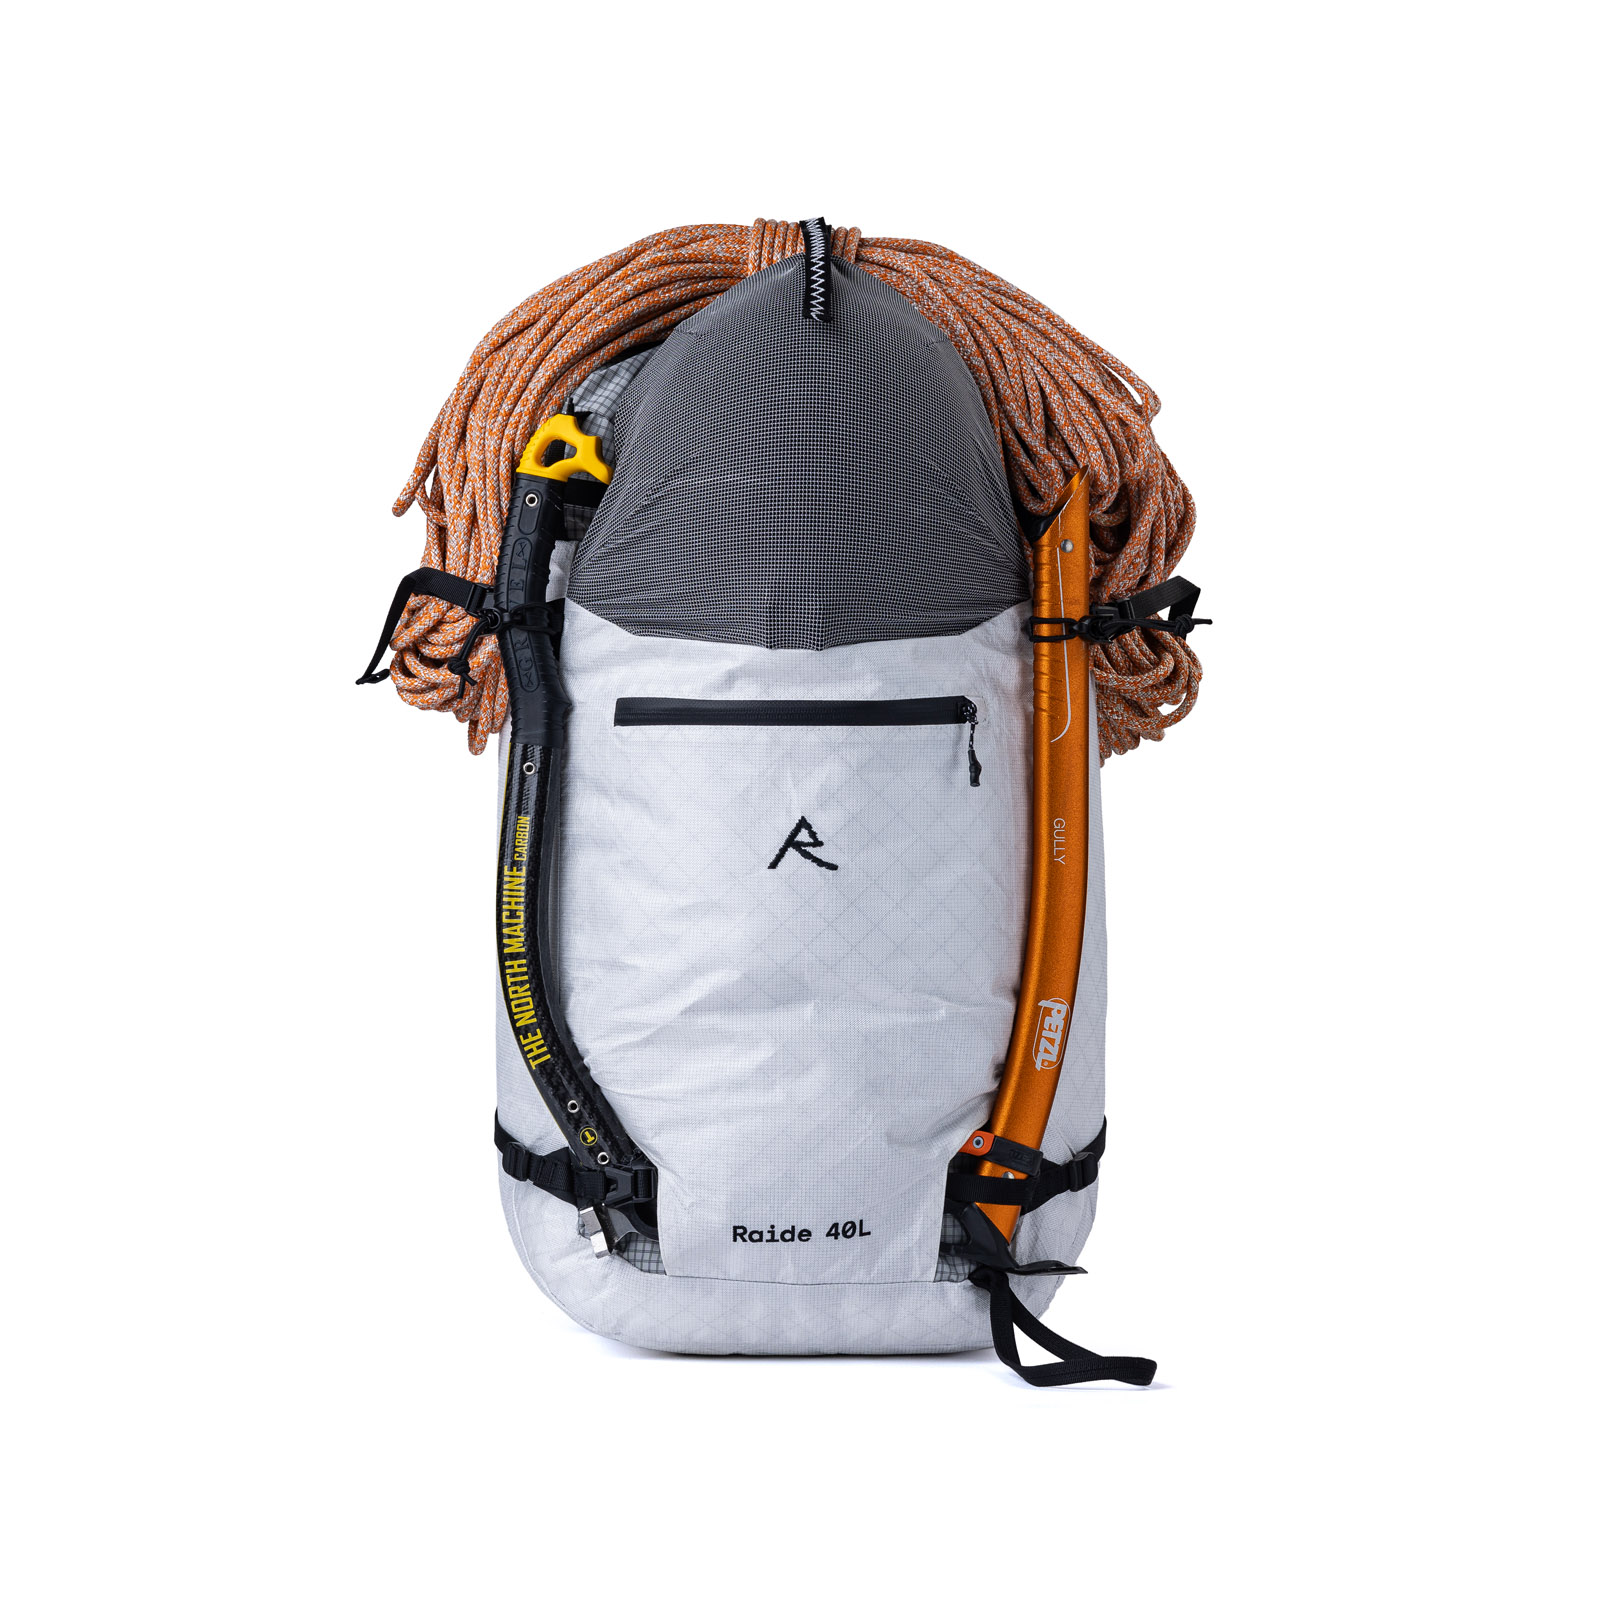 Blister reviews the Raide LF 40L backpack